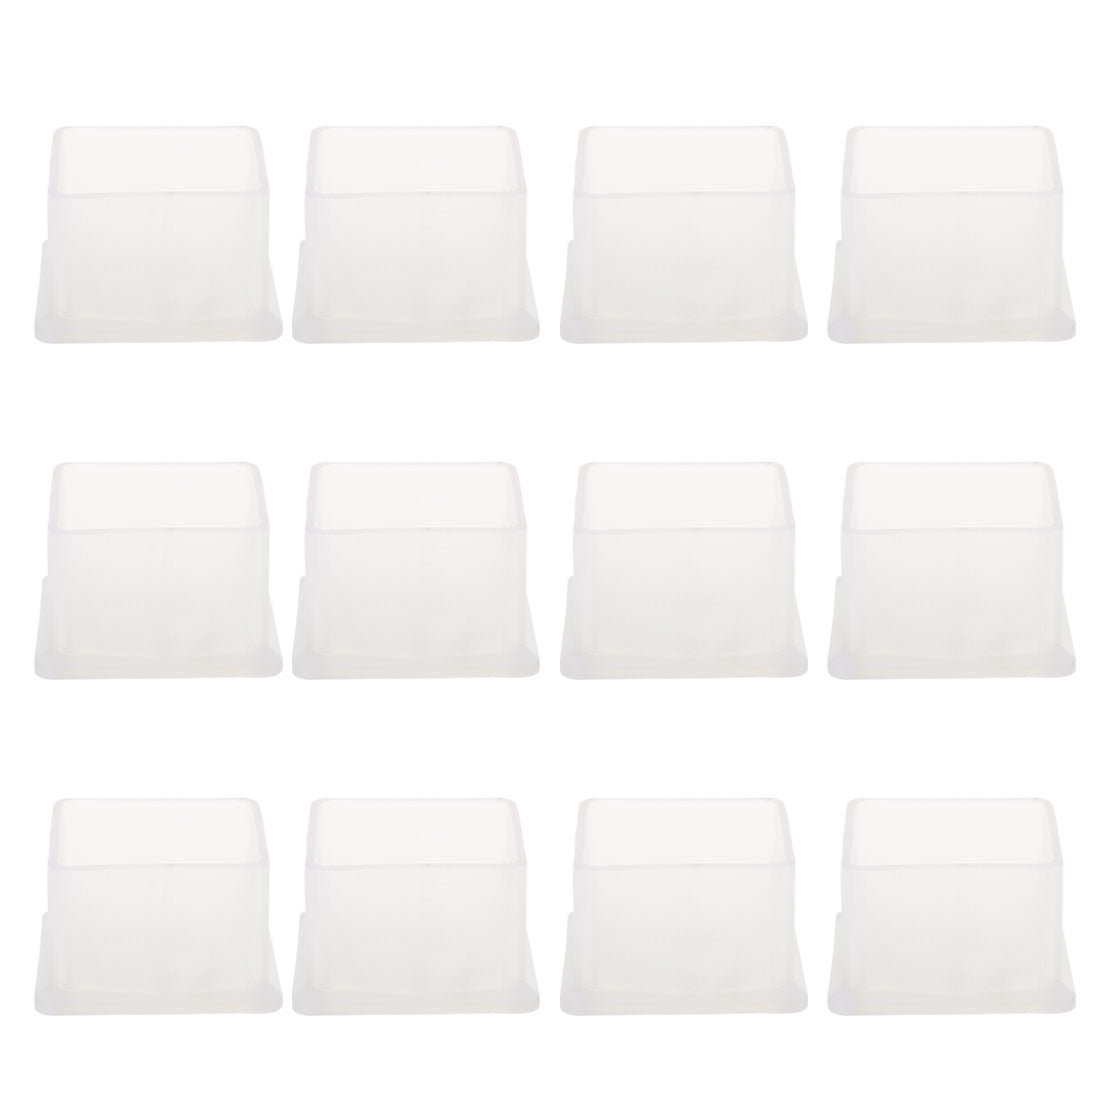 uxcell Uxcell Clear PVC Table Desk Leg Caps  Feet Cover Slider Grippers Floor Protector 12pcs